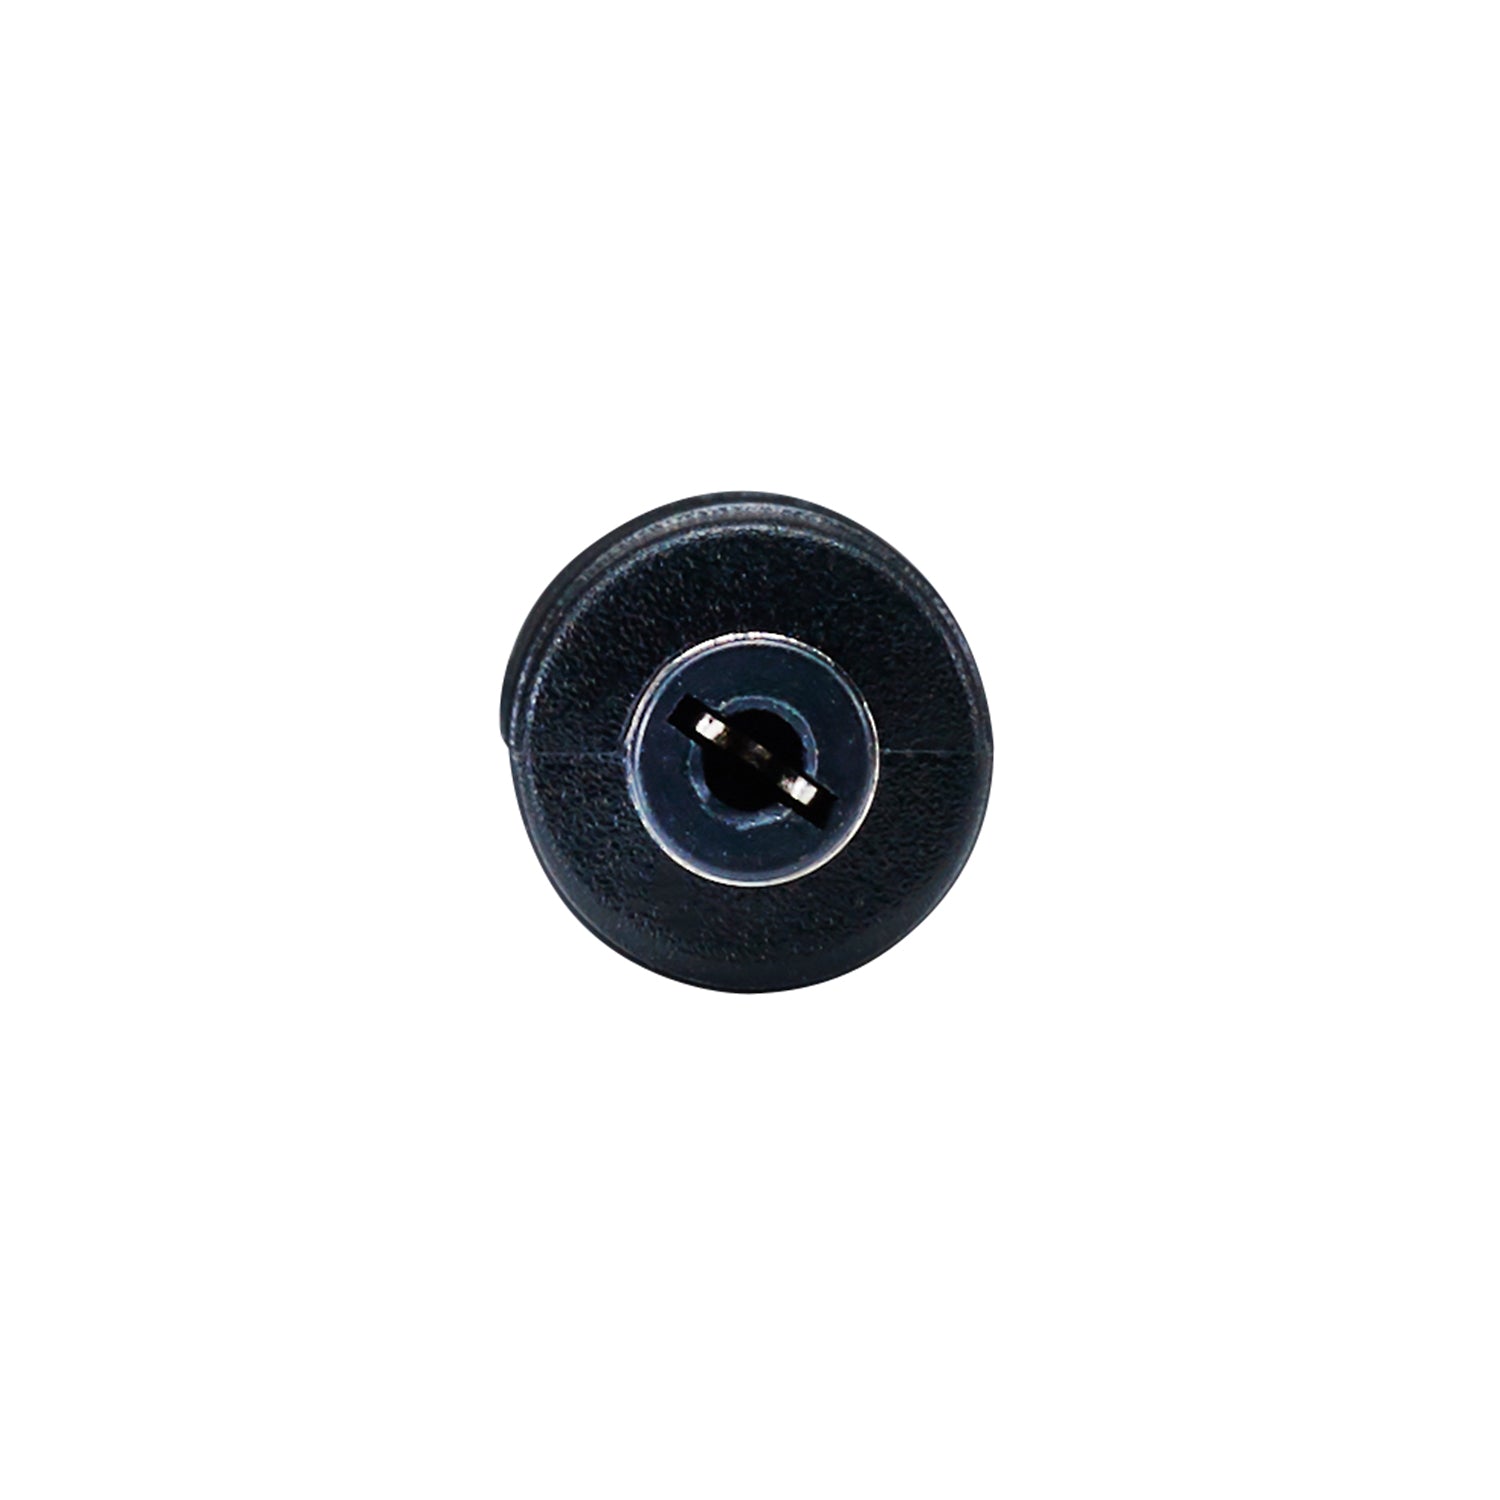 Adapter cable for barrel connector 5.5x2.1mm